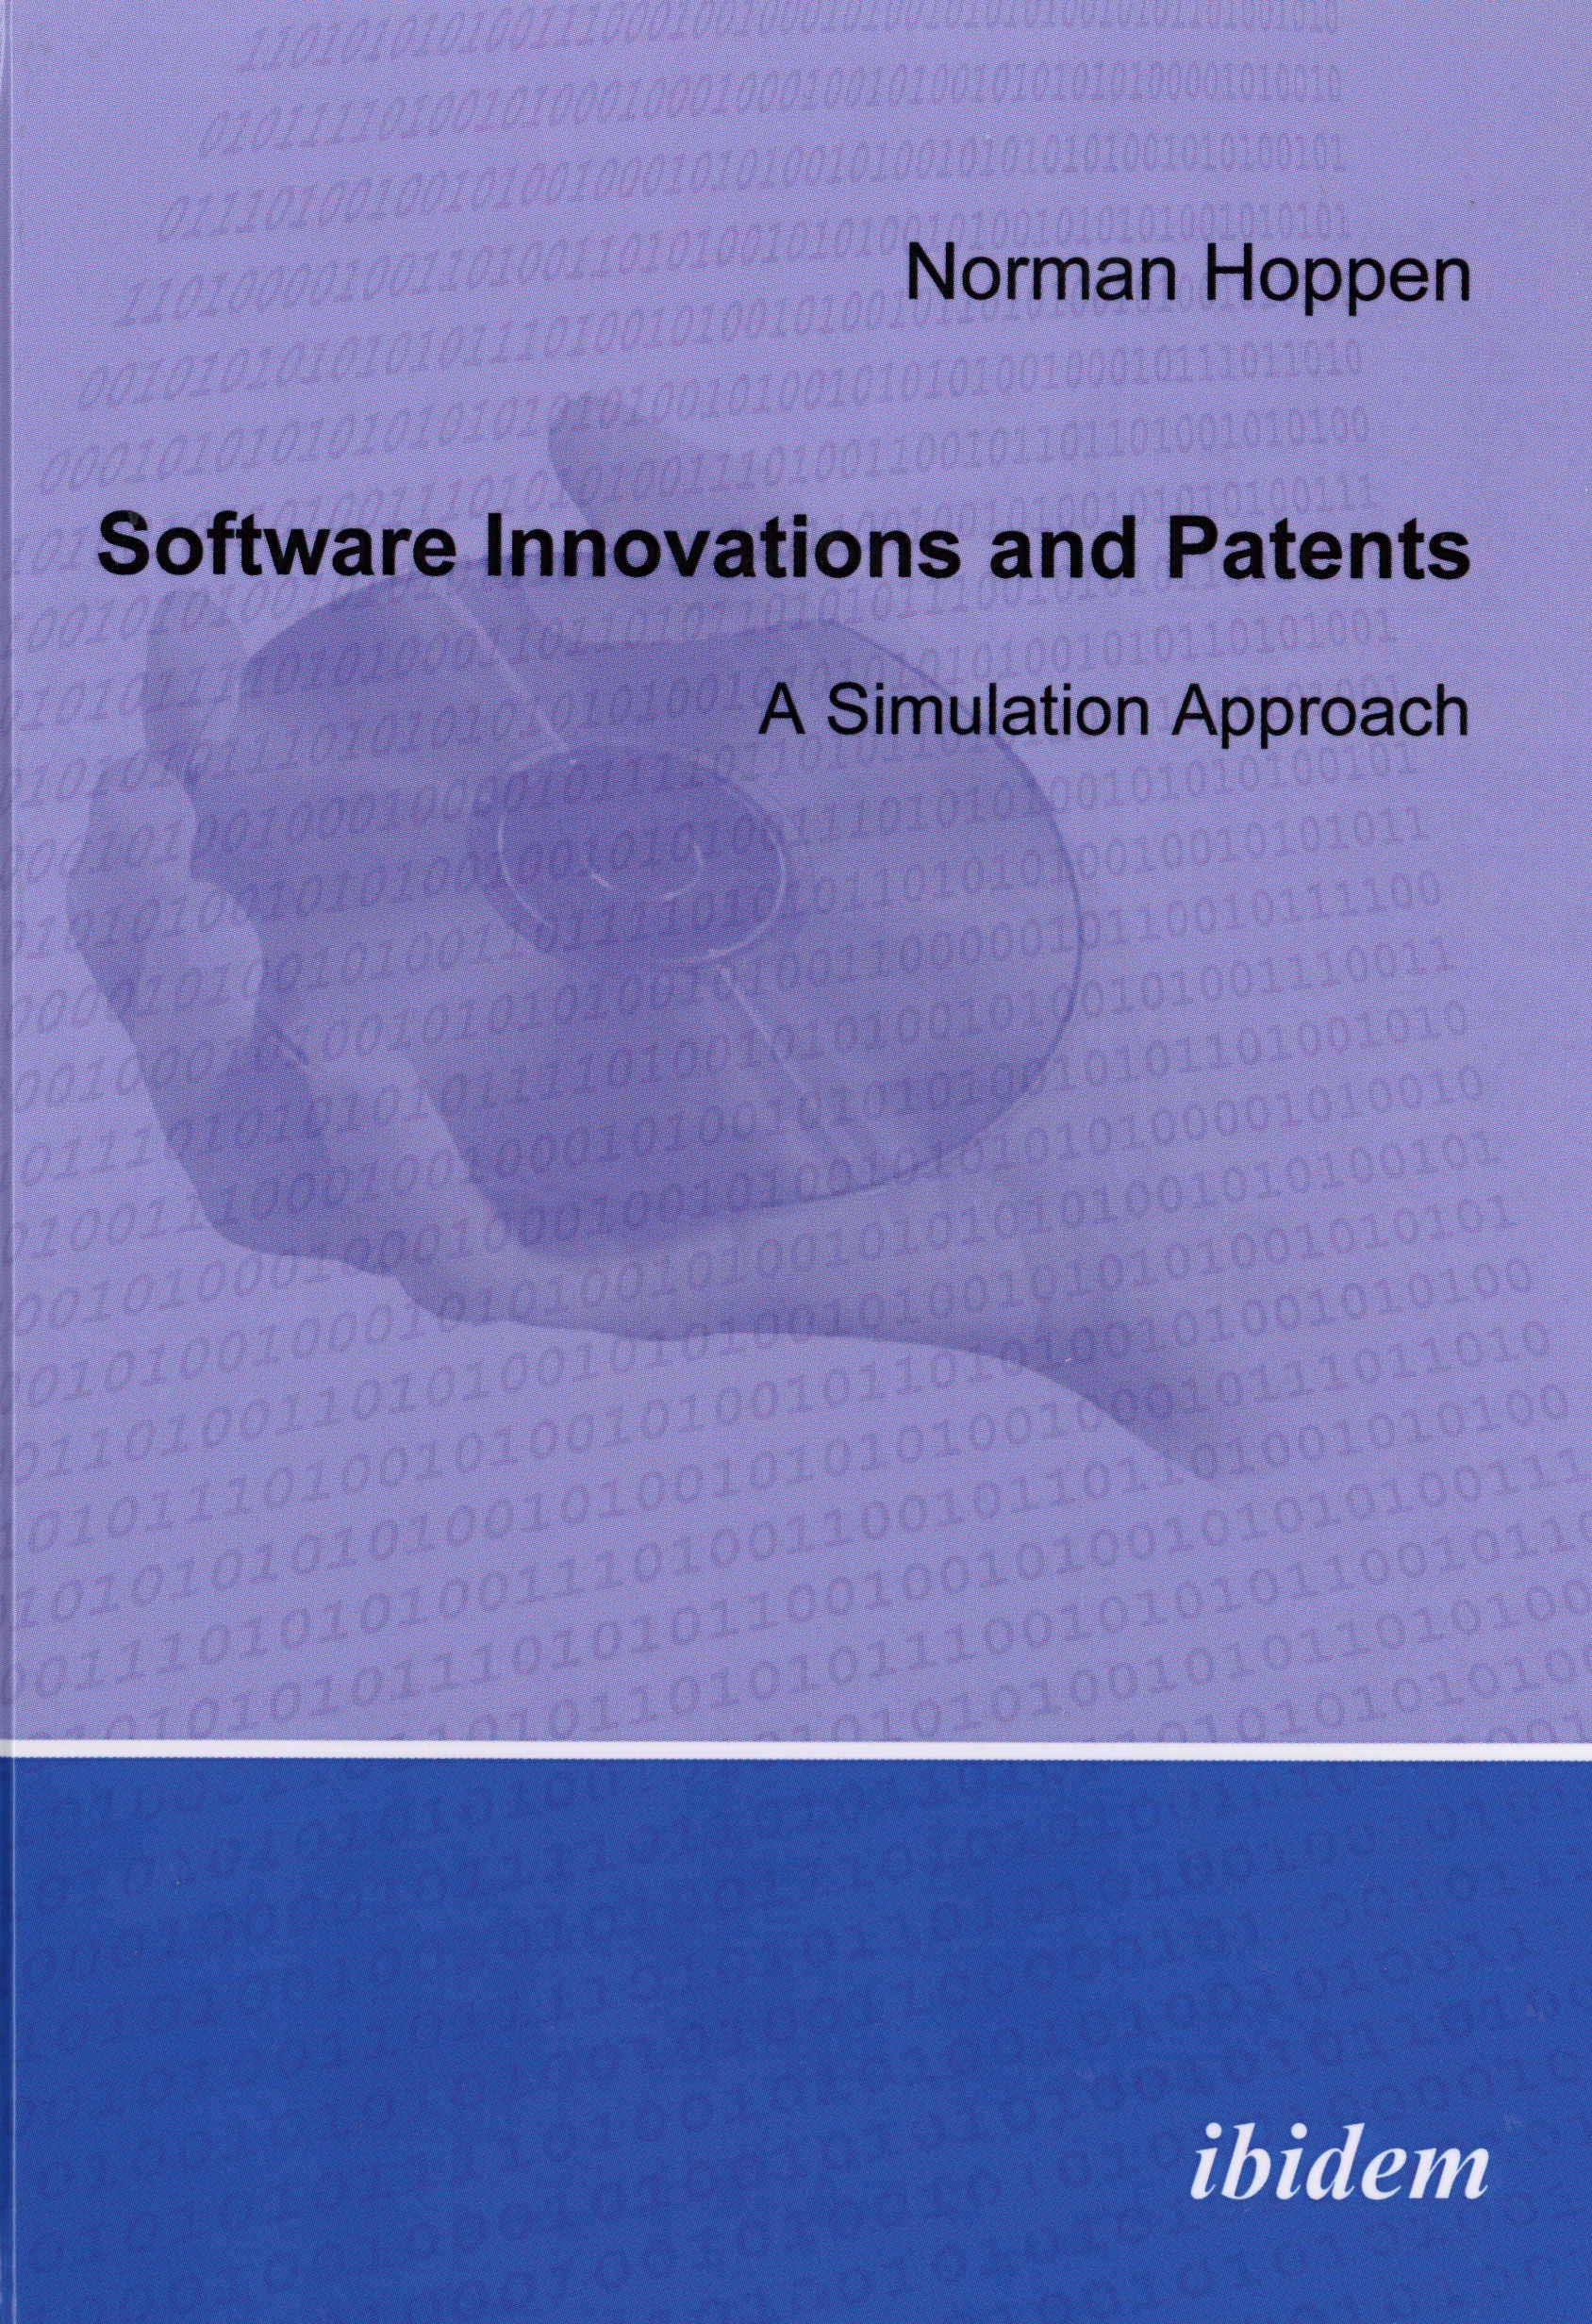 Software Innovations and Patents